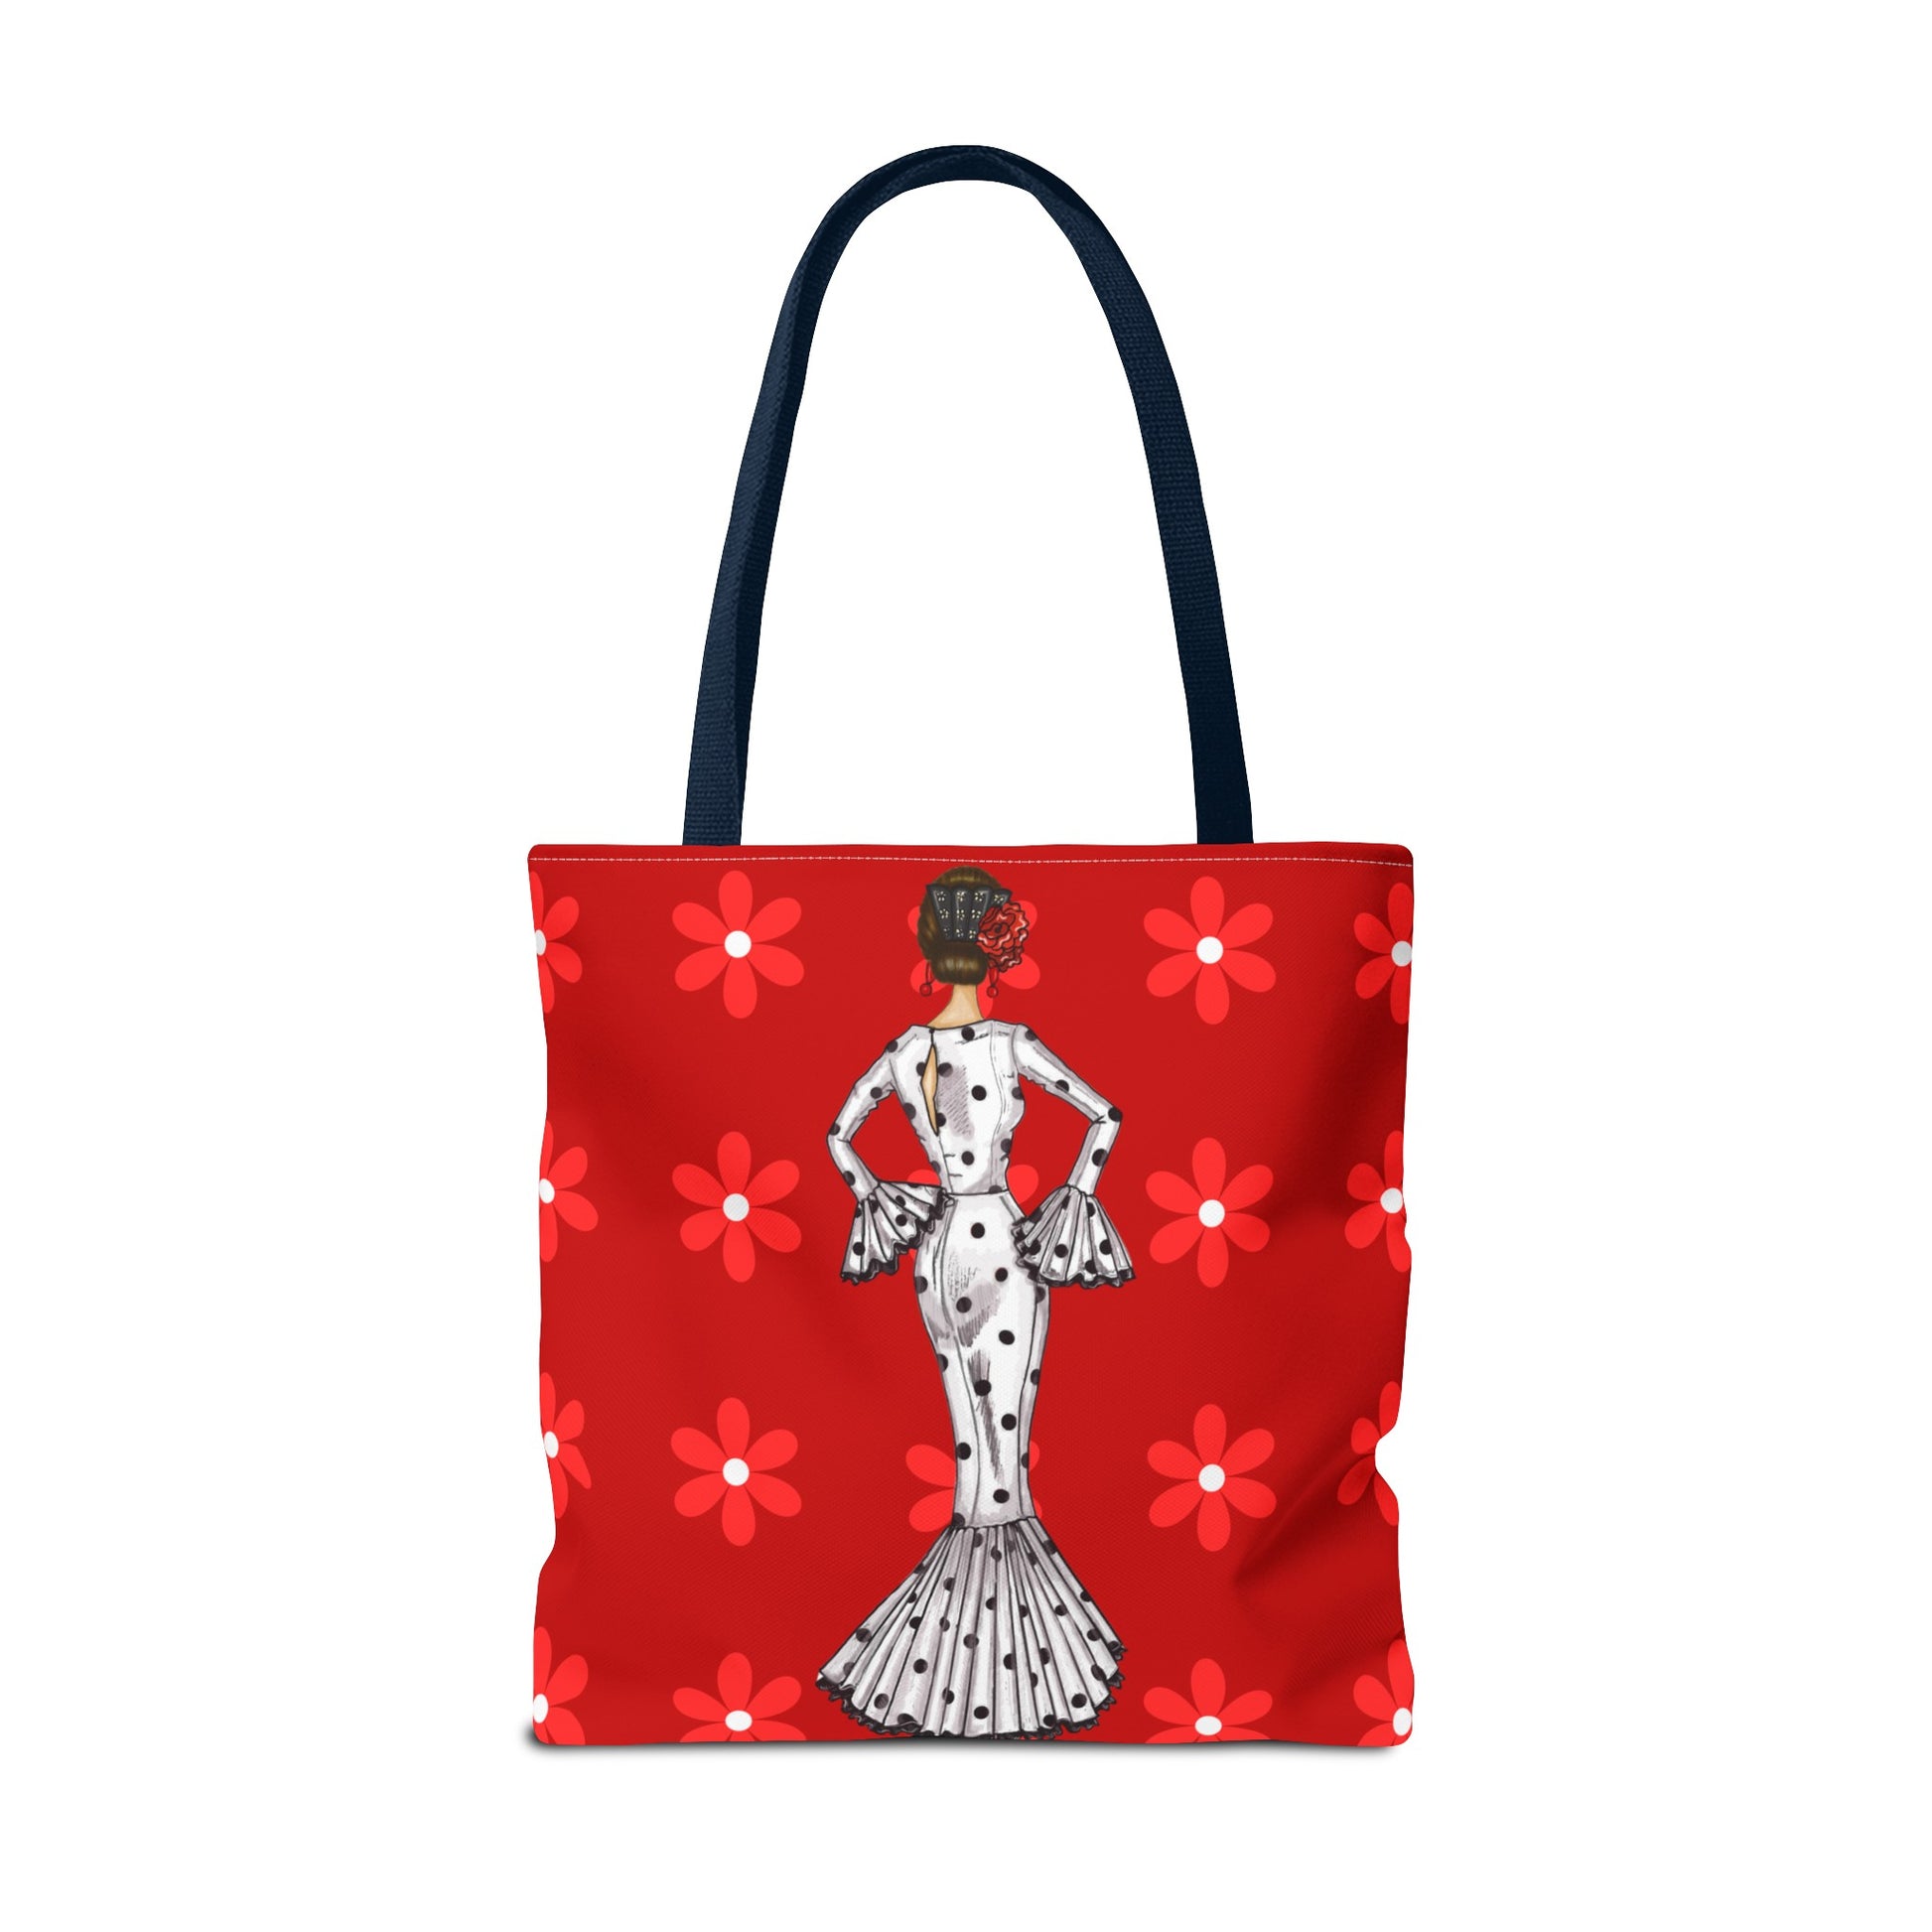 a red tote bag with a dalmatian dog on it